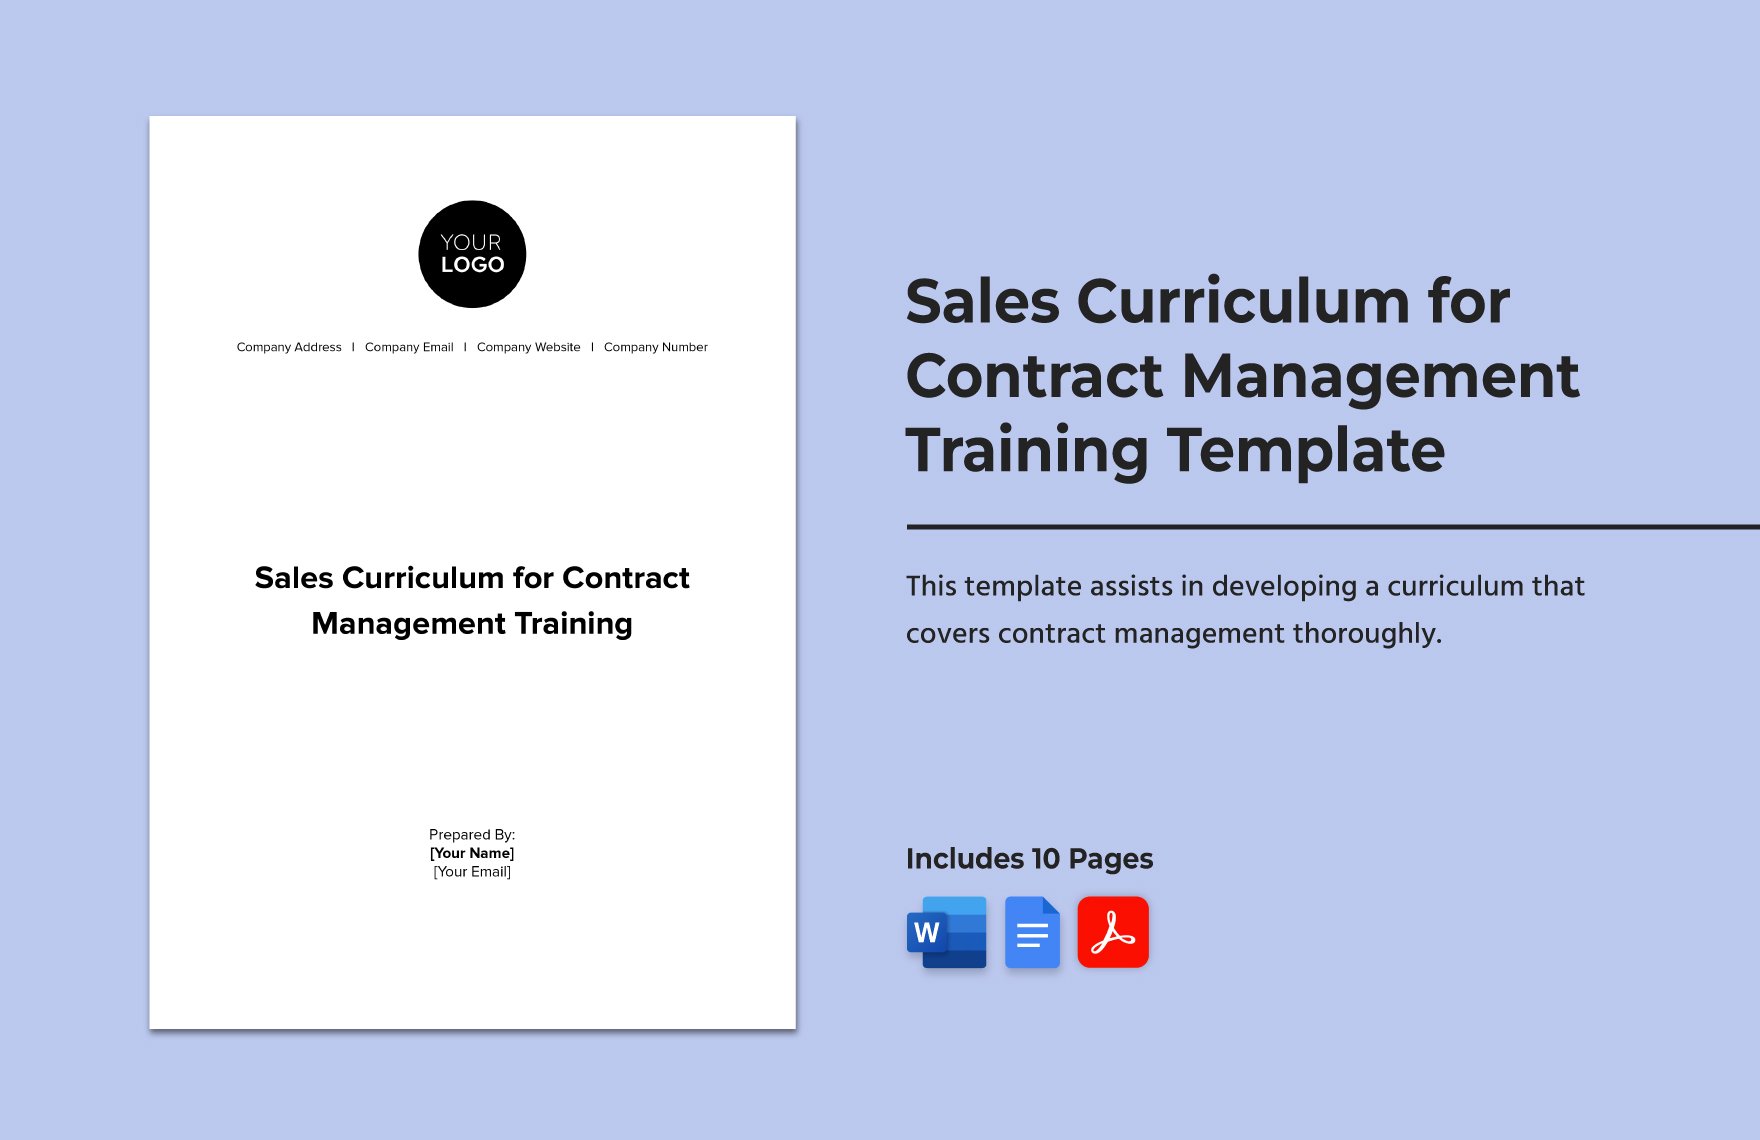 Sales Curriculum for Contract Management Training Template